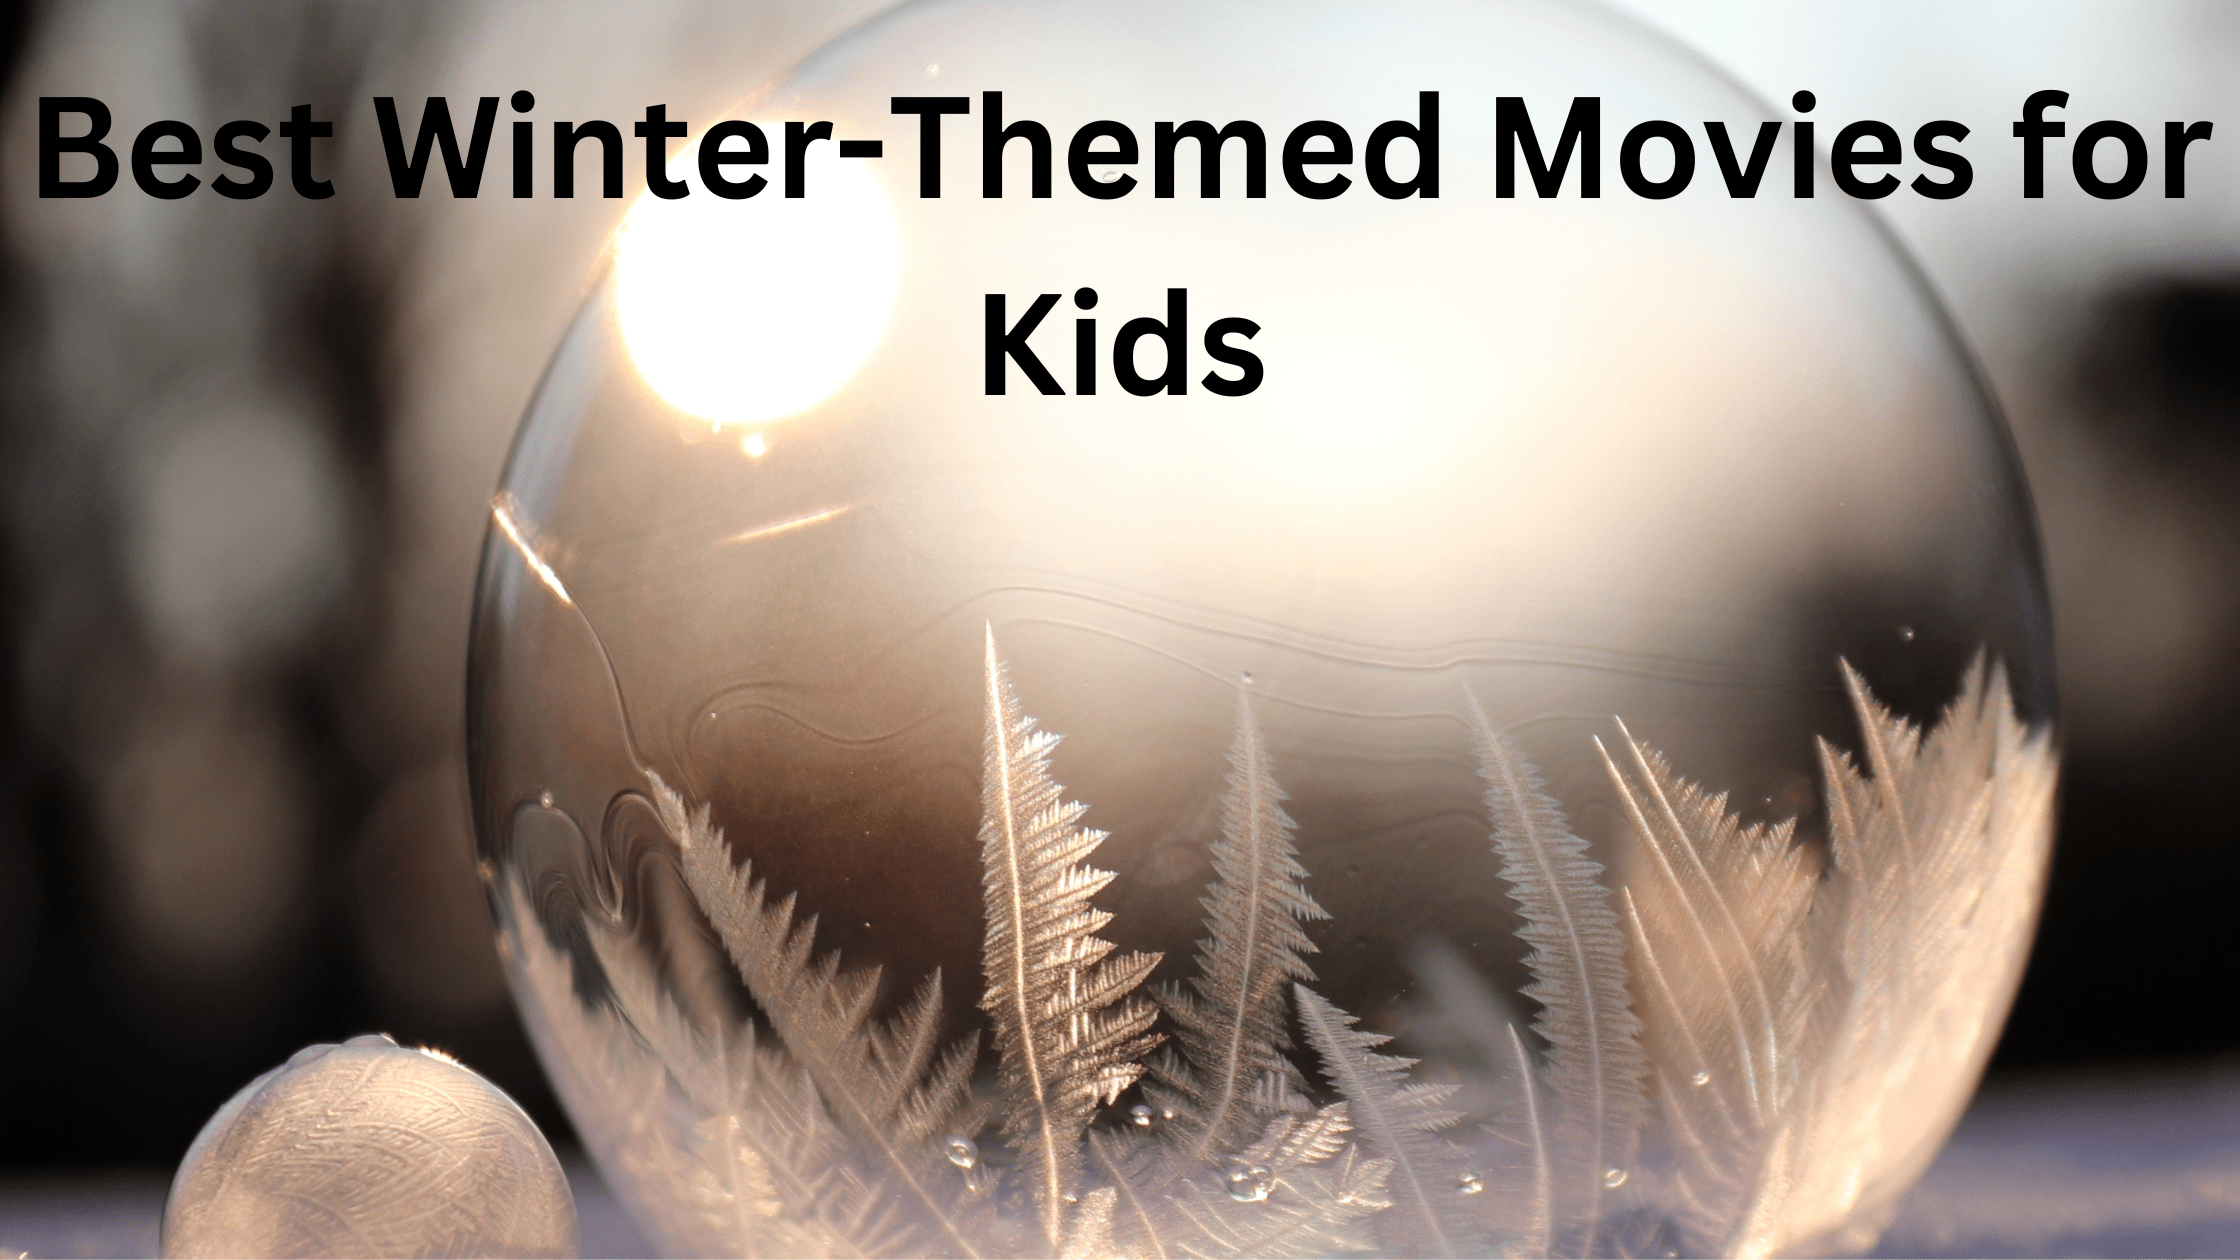 11 Best Winter-Themed Movies for Kids to Watch 2